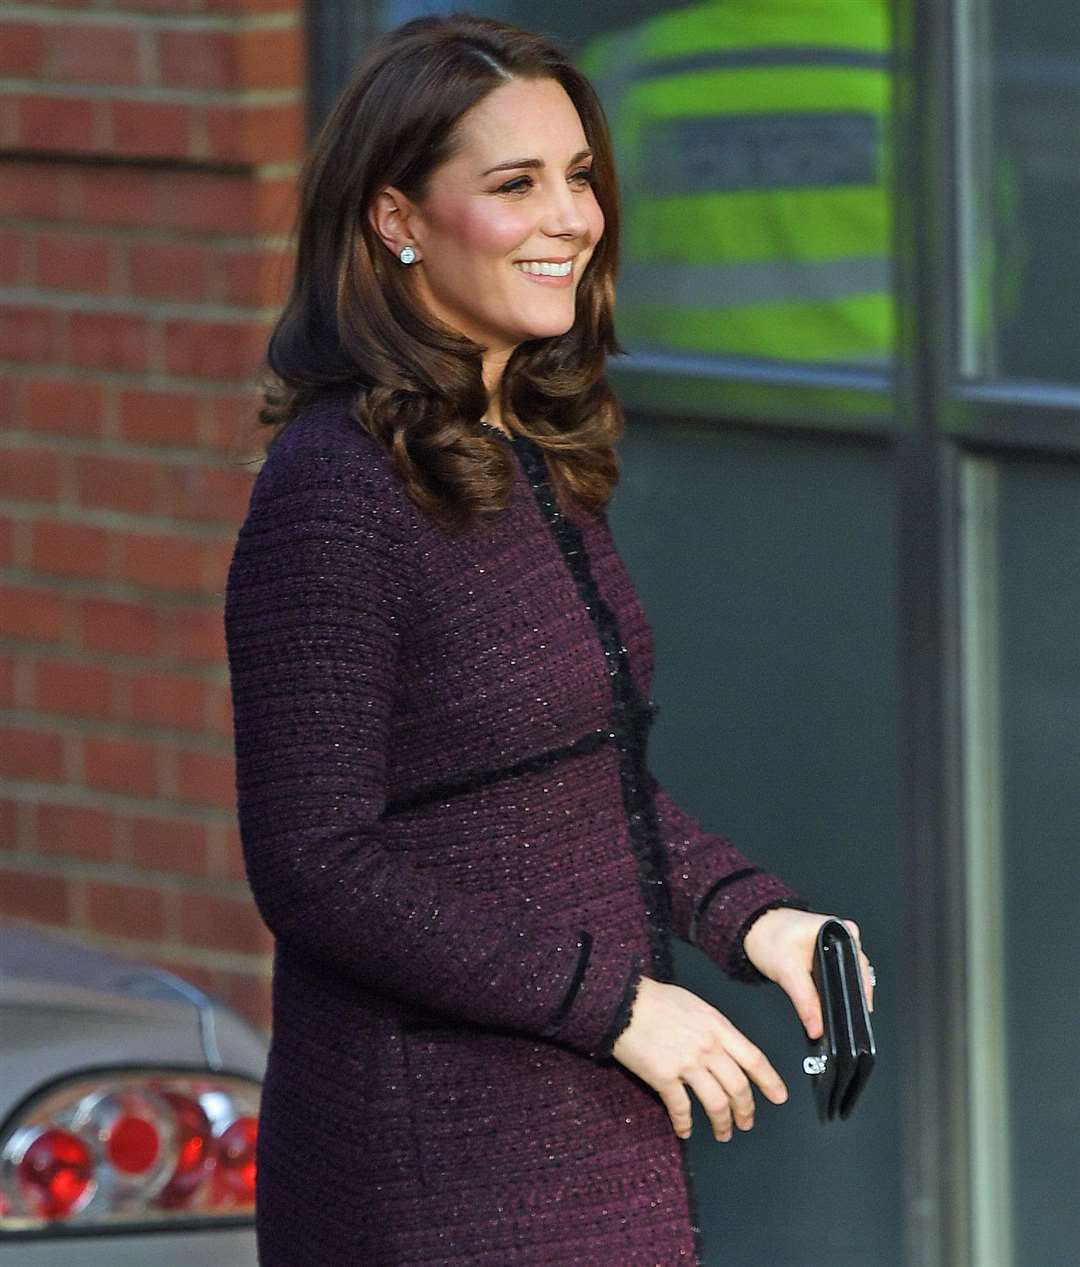 Coats have been the Duchess of Cambridge go-to maternity wear